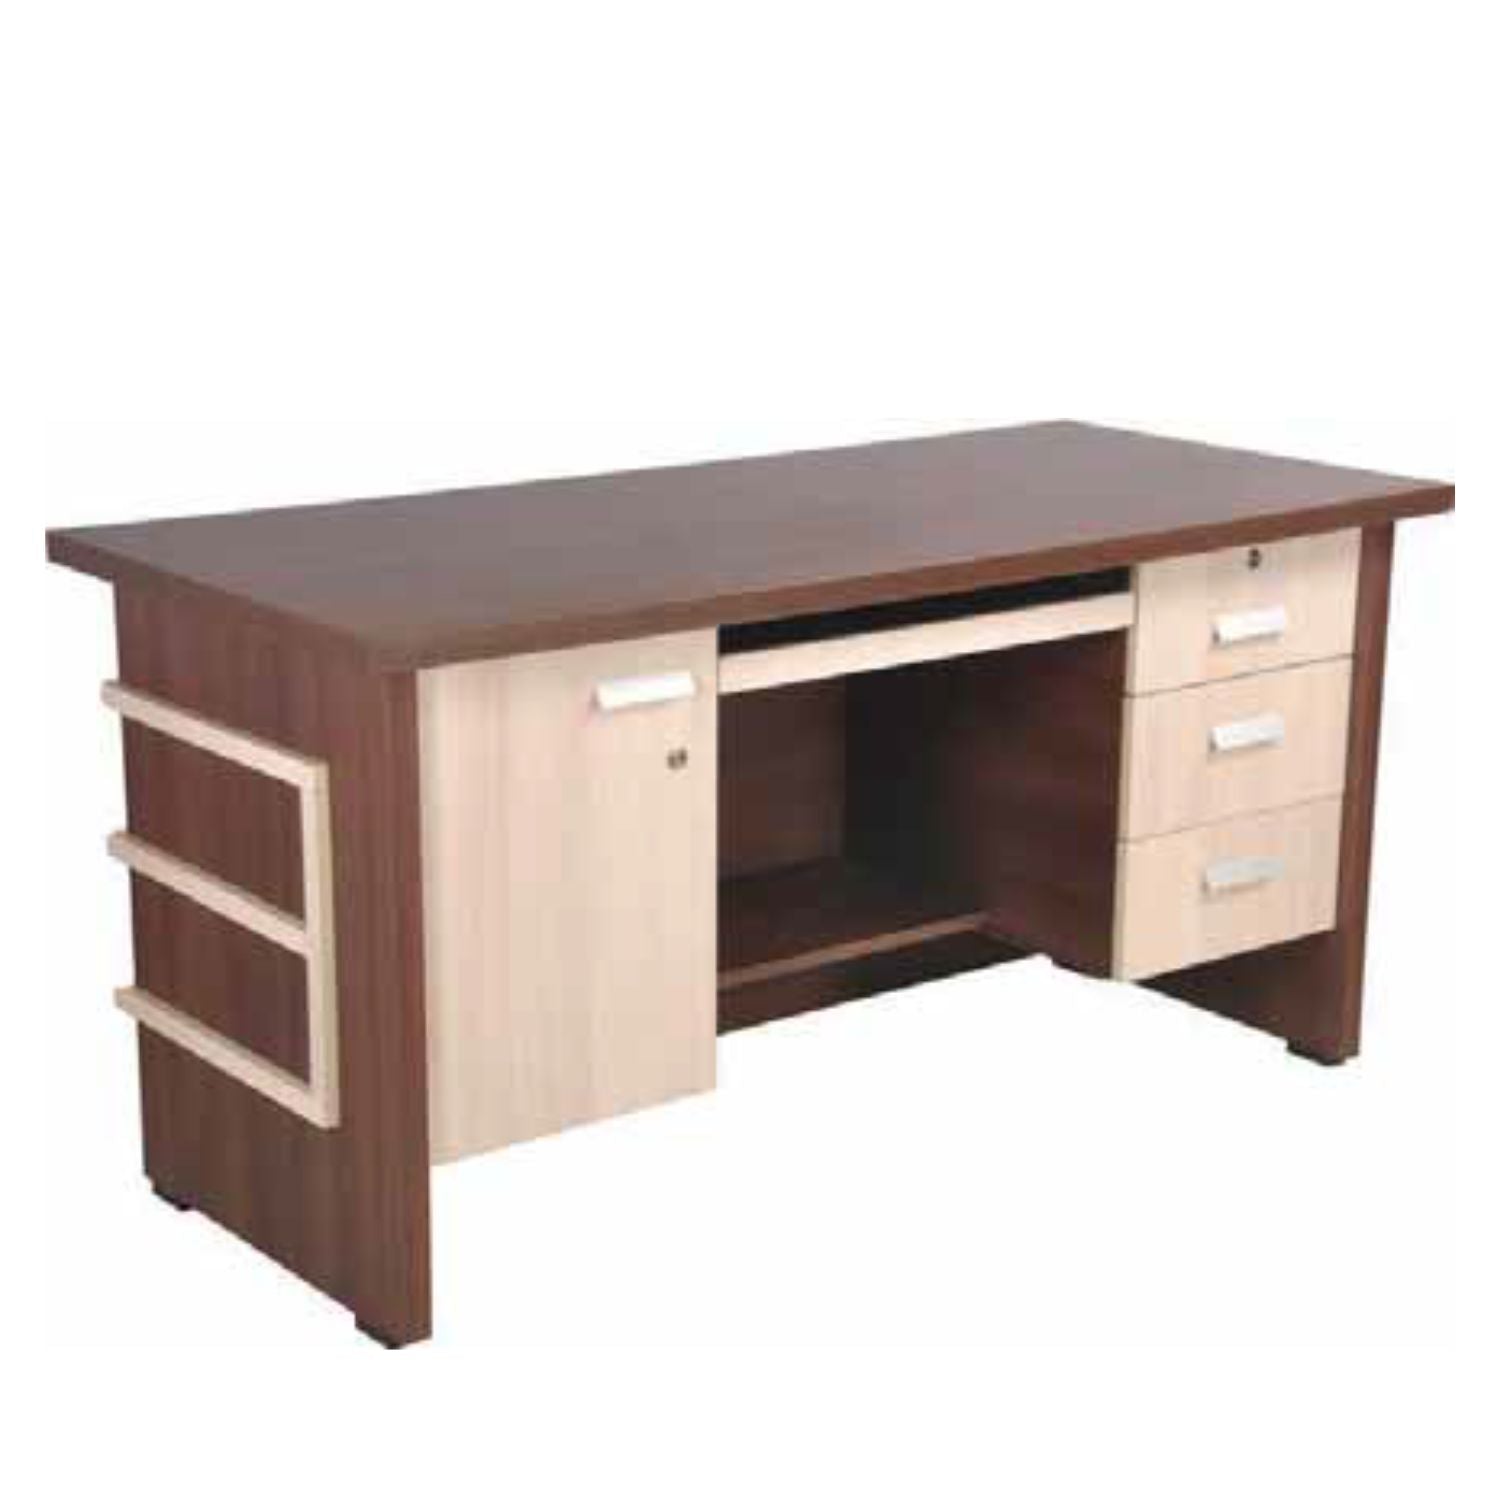 BF-IT-1036 ANGIE-35 EXECUTIVE TABLE Mobel Furniture